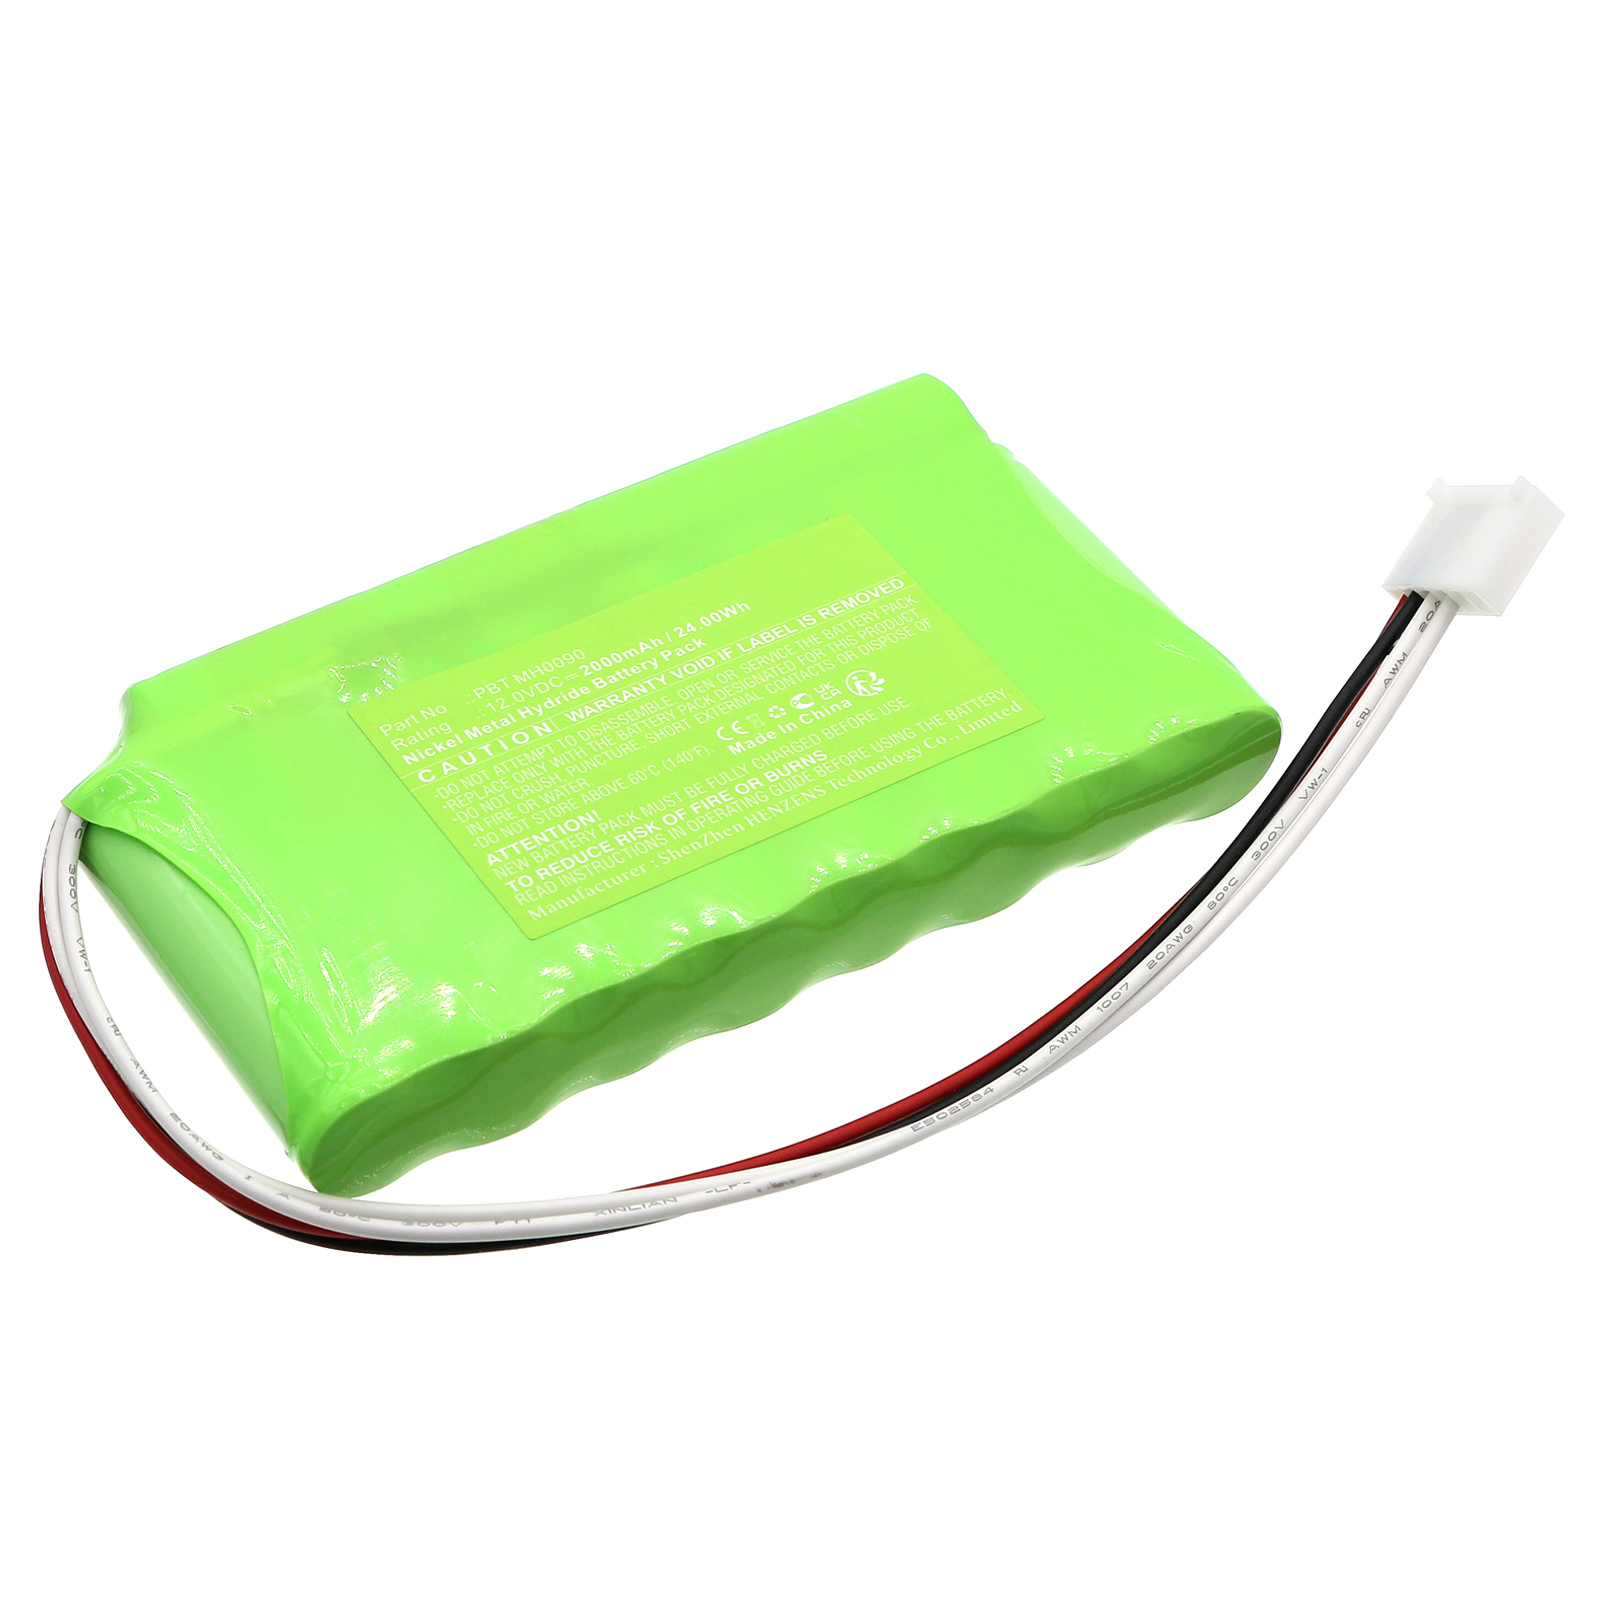 Synergy Digital Medical Battery, Compatible with Globus PBT MH0090 Medical Battery (Ni-MH, 12V, 2000mAh)